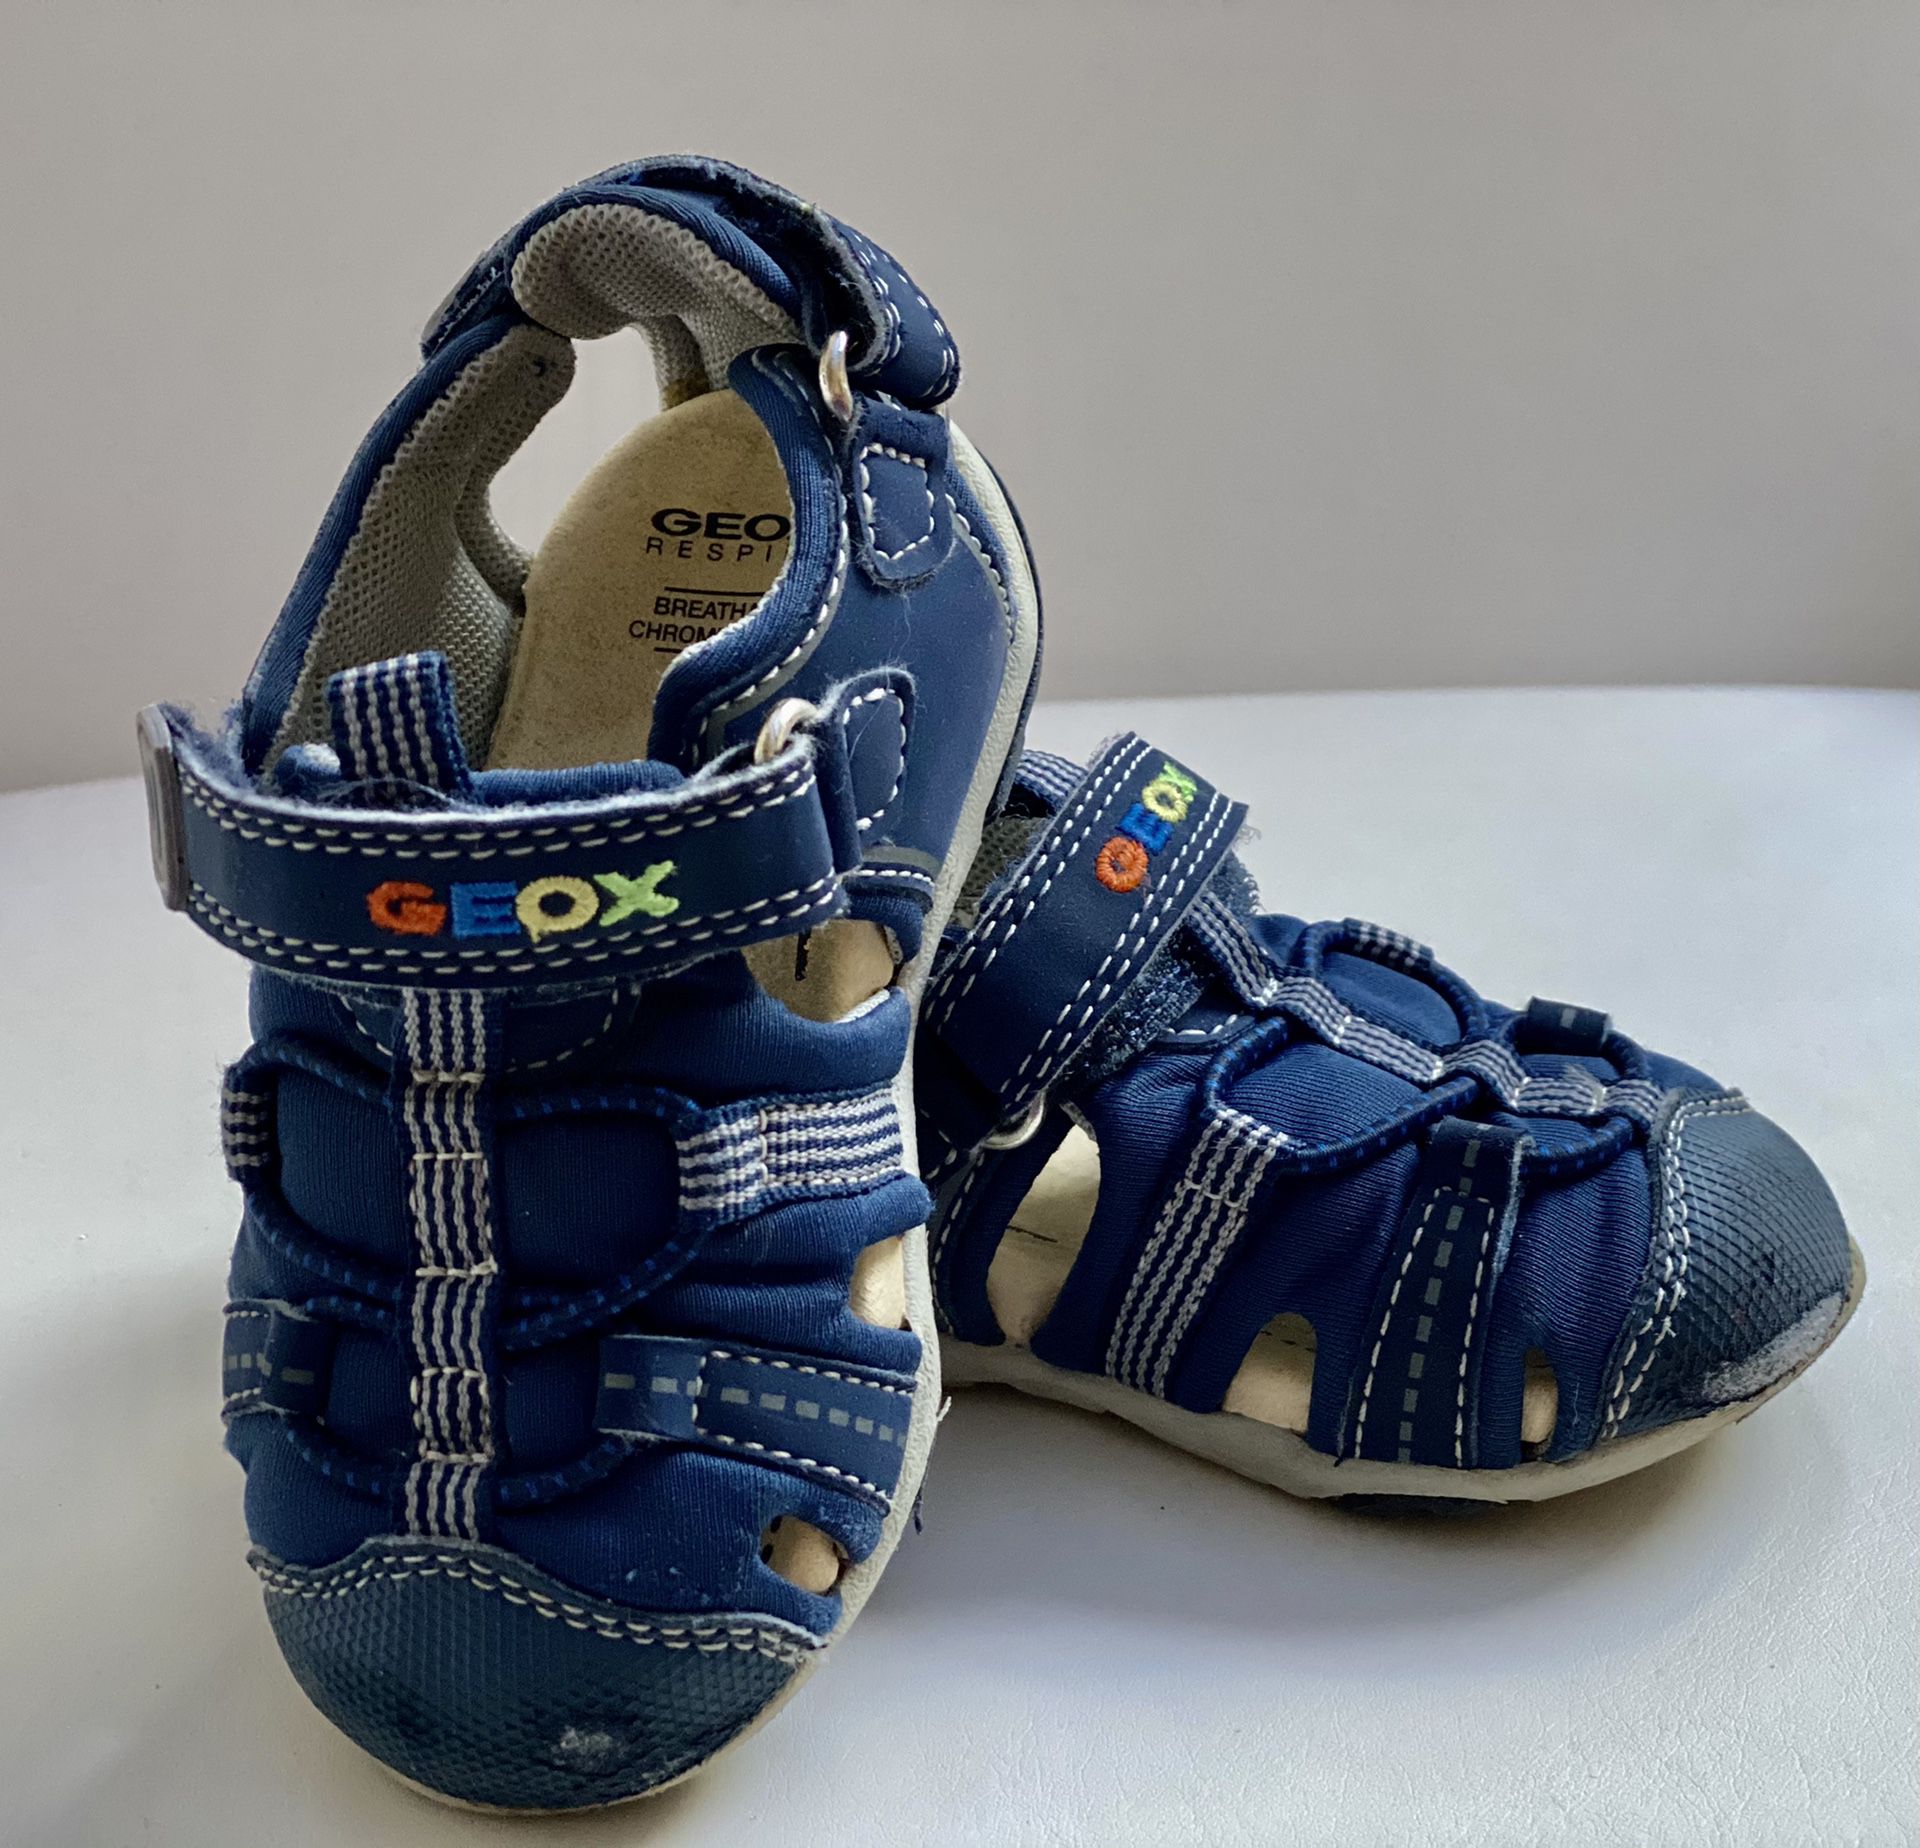 Geox toddler sandals. Orthopedic design! us 6. Europe 22. for in Hollywood, FL - OfferUp